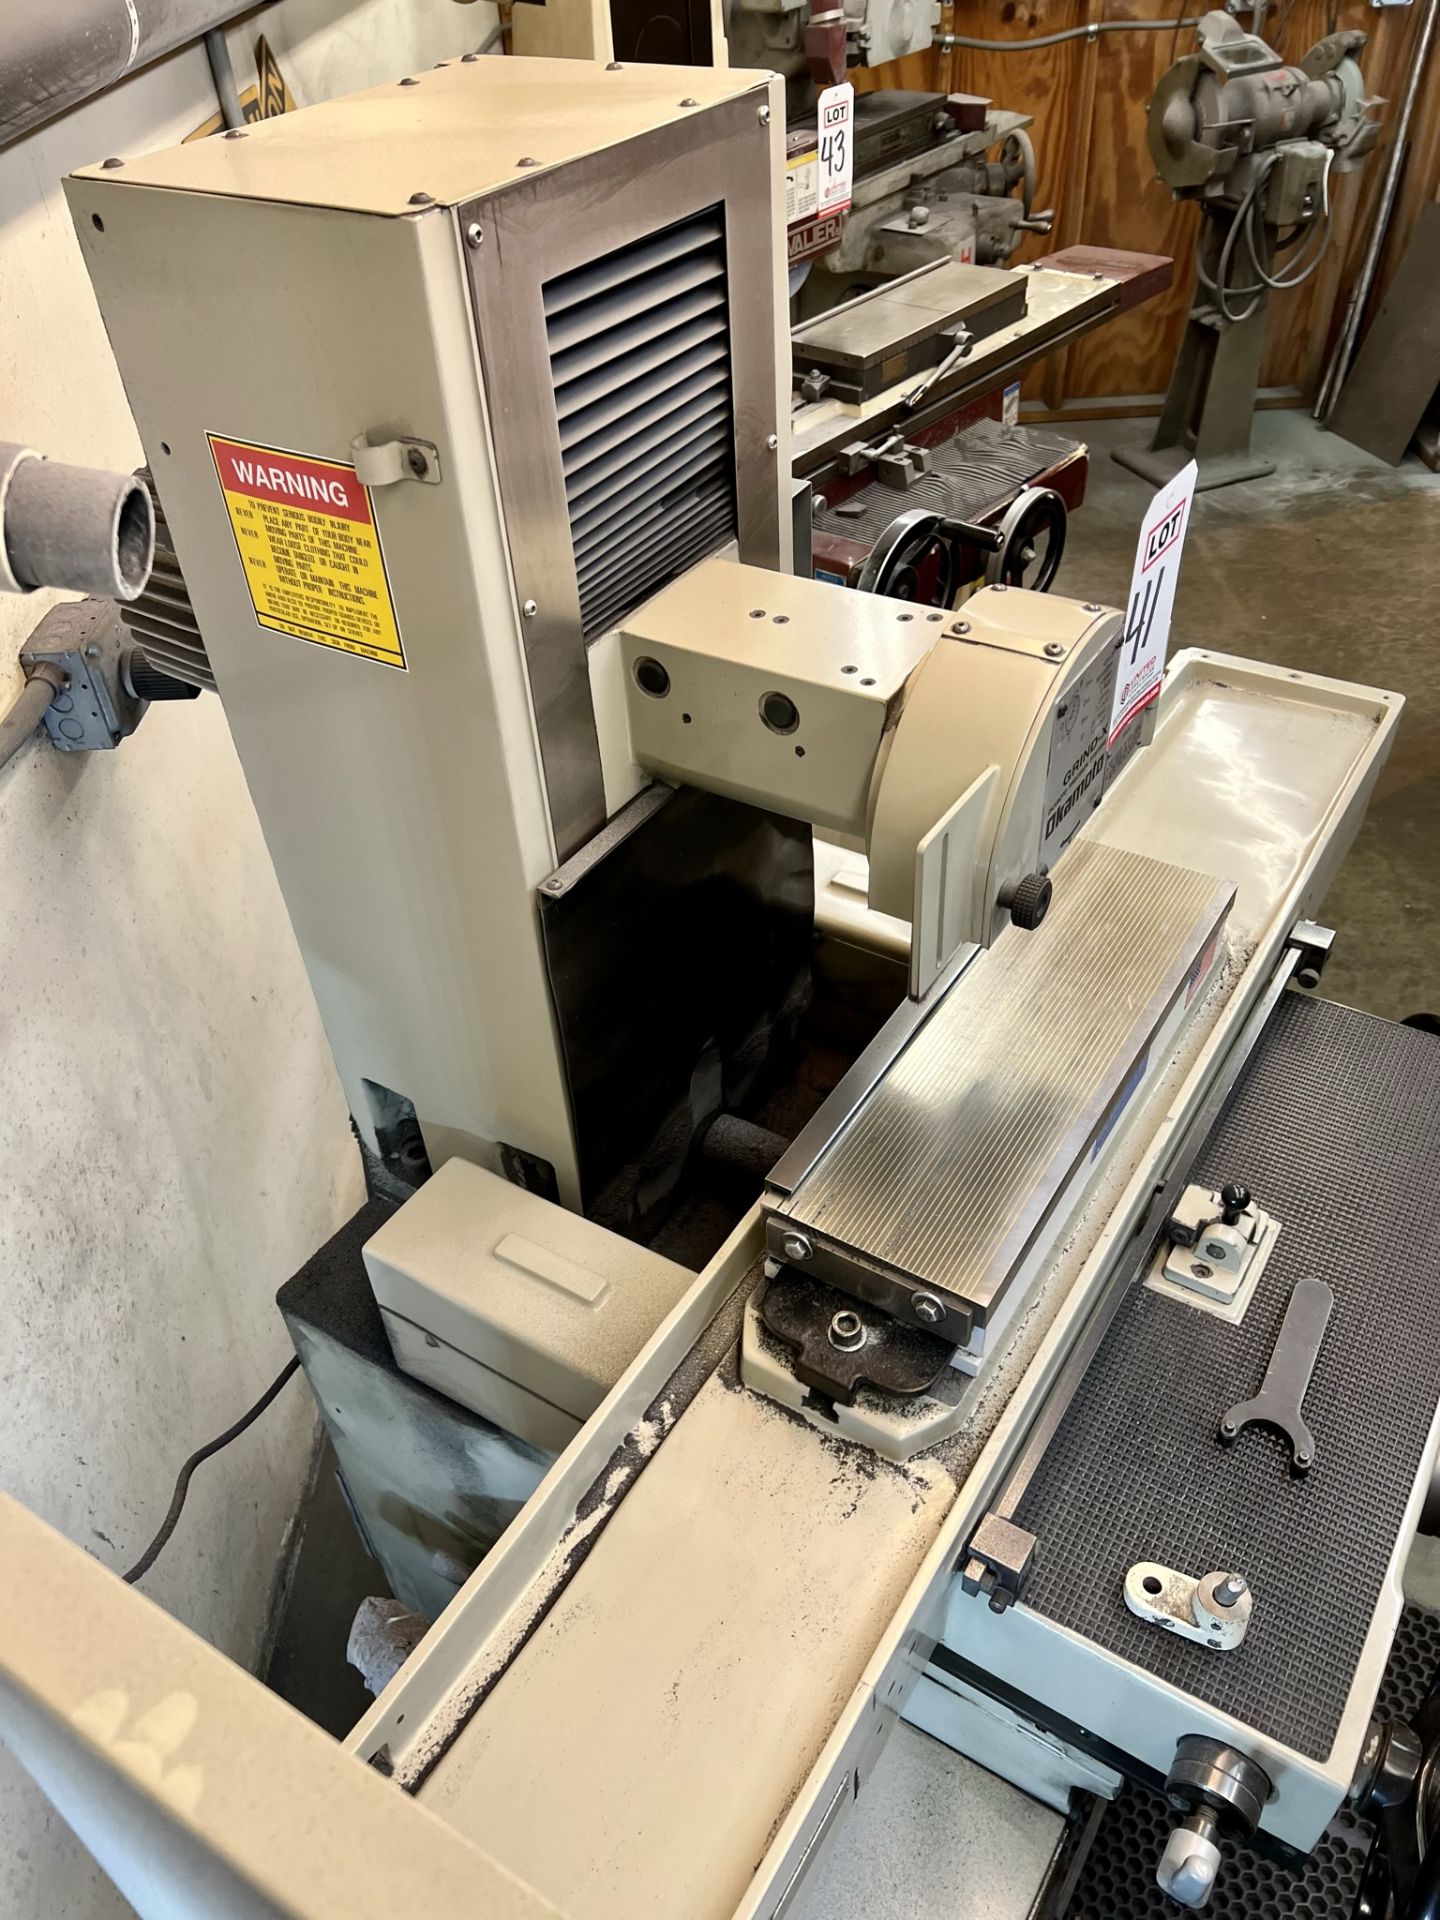 2018 OKAMOTO LINEAR 618B SURFACE GRINDER, S/N 48824, W/ WALKER 18" X 6" MAGNETIC CHUCK AND CONTROLS, - Image 8 of 15